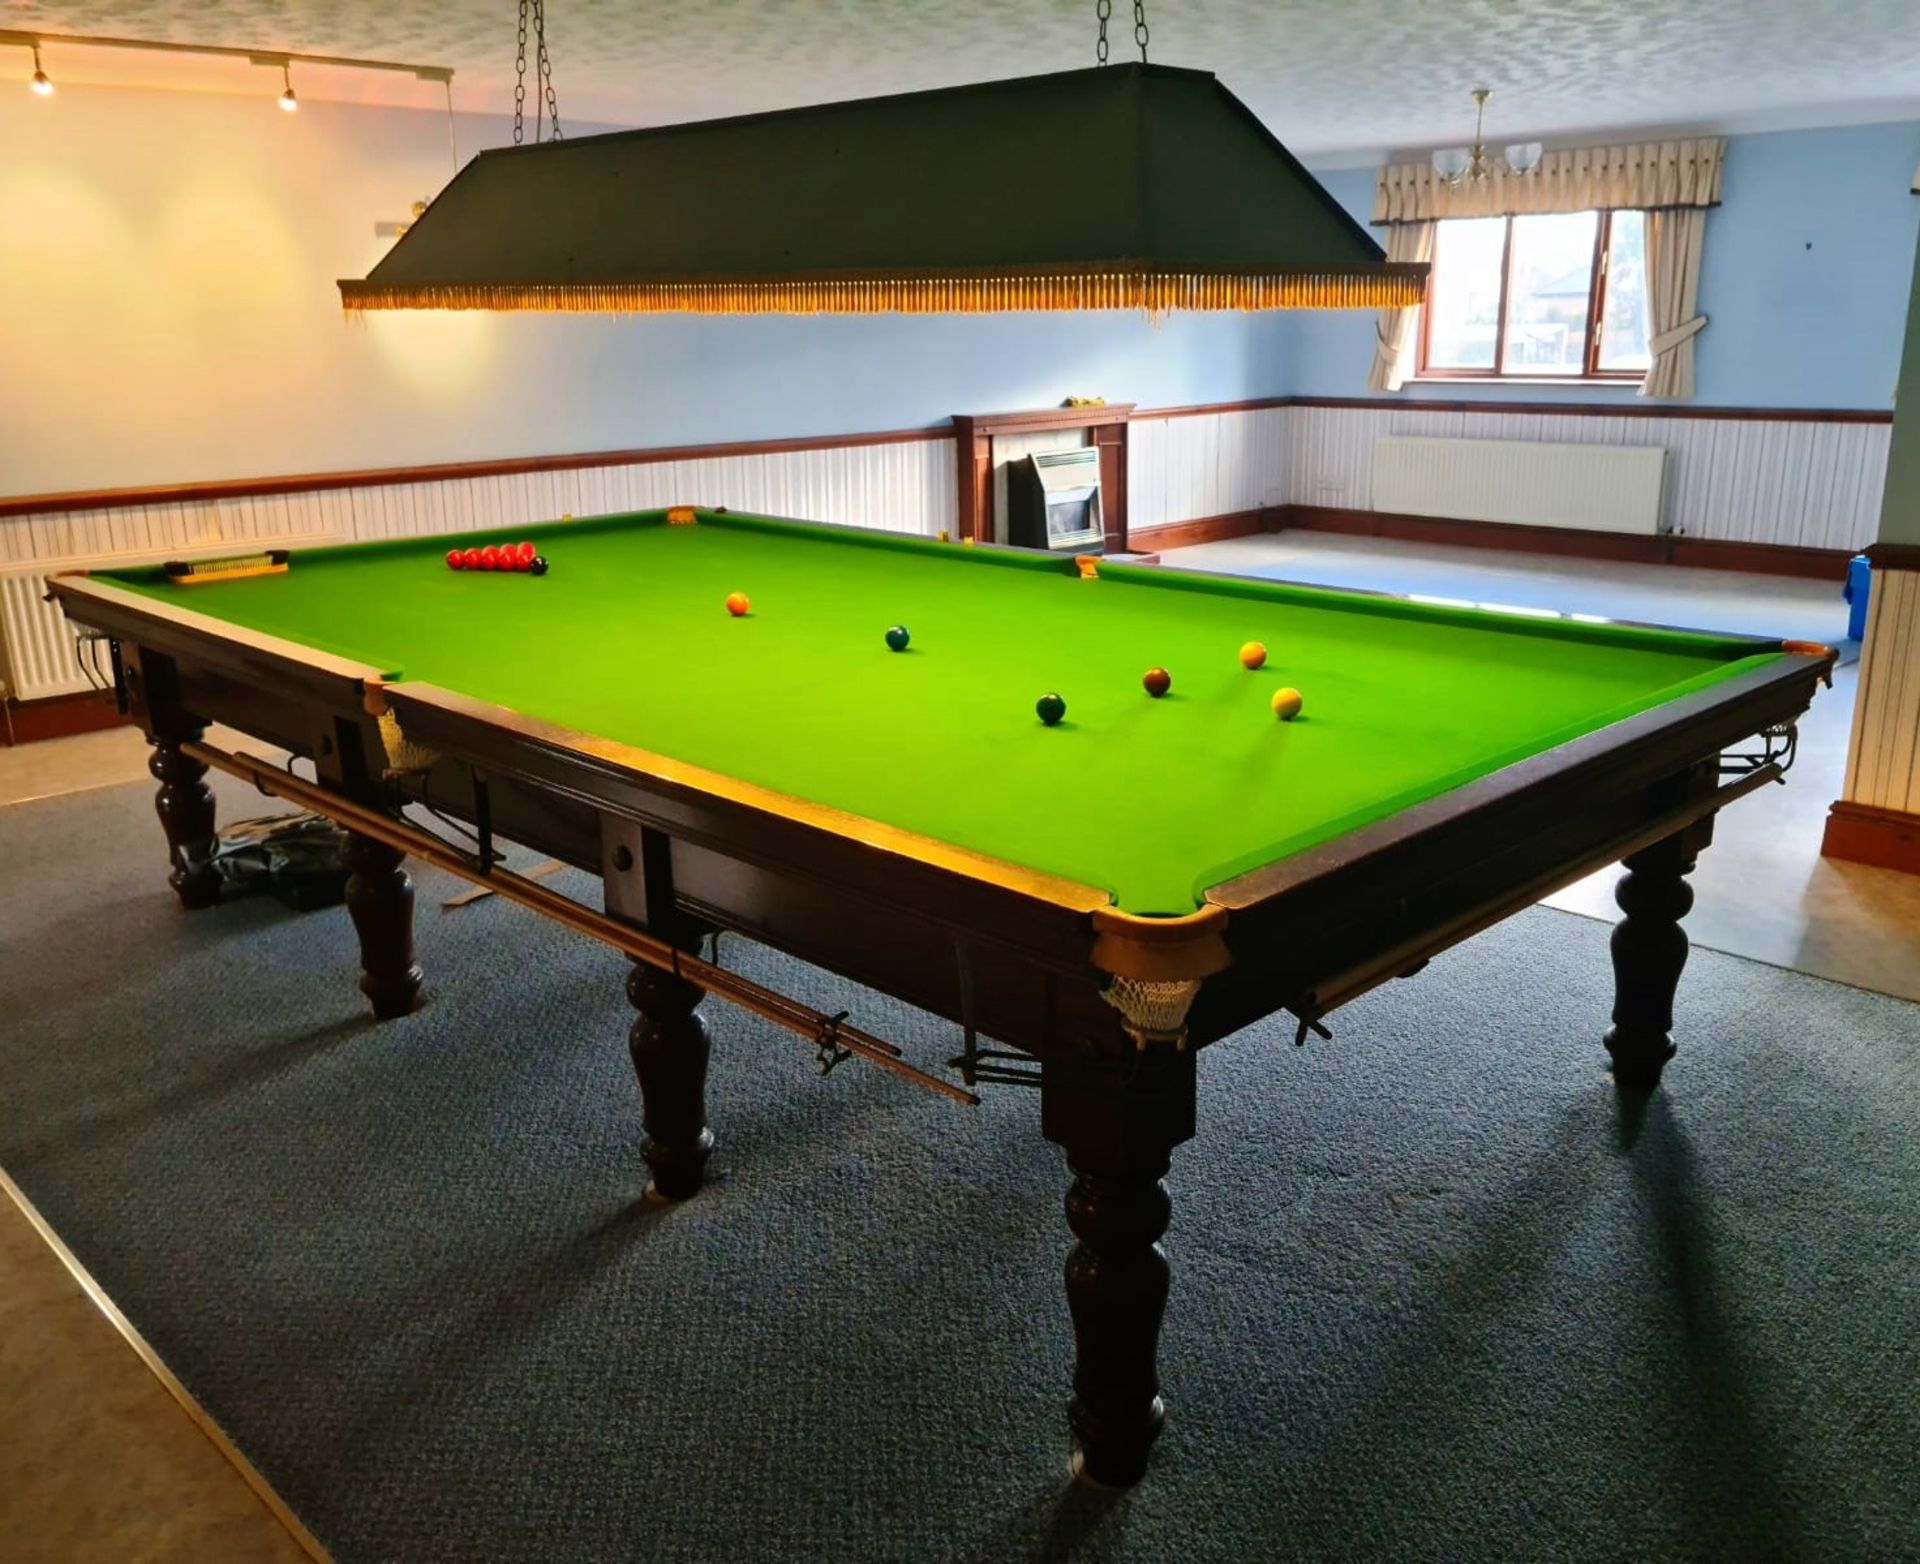 1 x Full-sized 12 x 6, 5-Slate Snooker Table With Ceiling Light And Accessories *NO VAT ON HAMMER* - Image 9 of 10